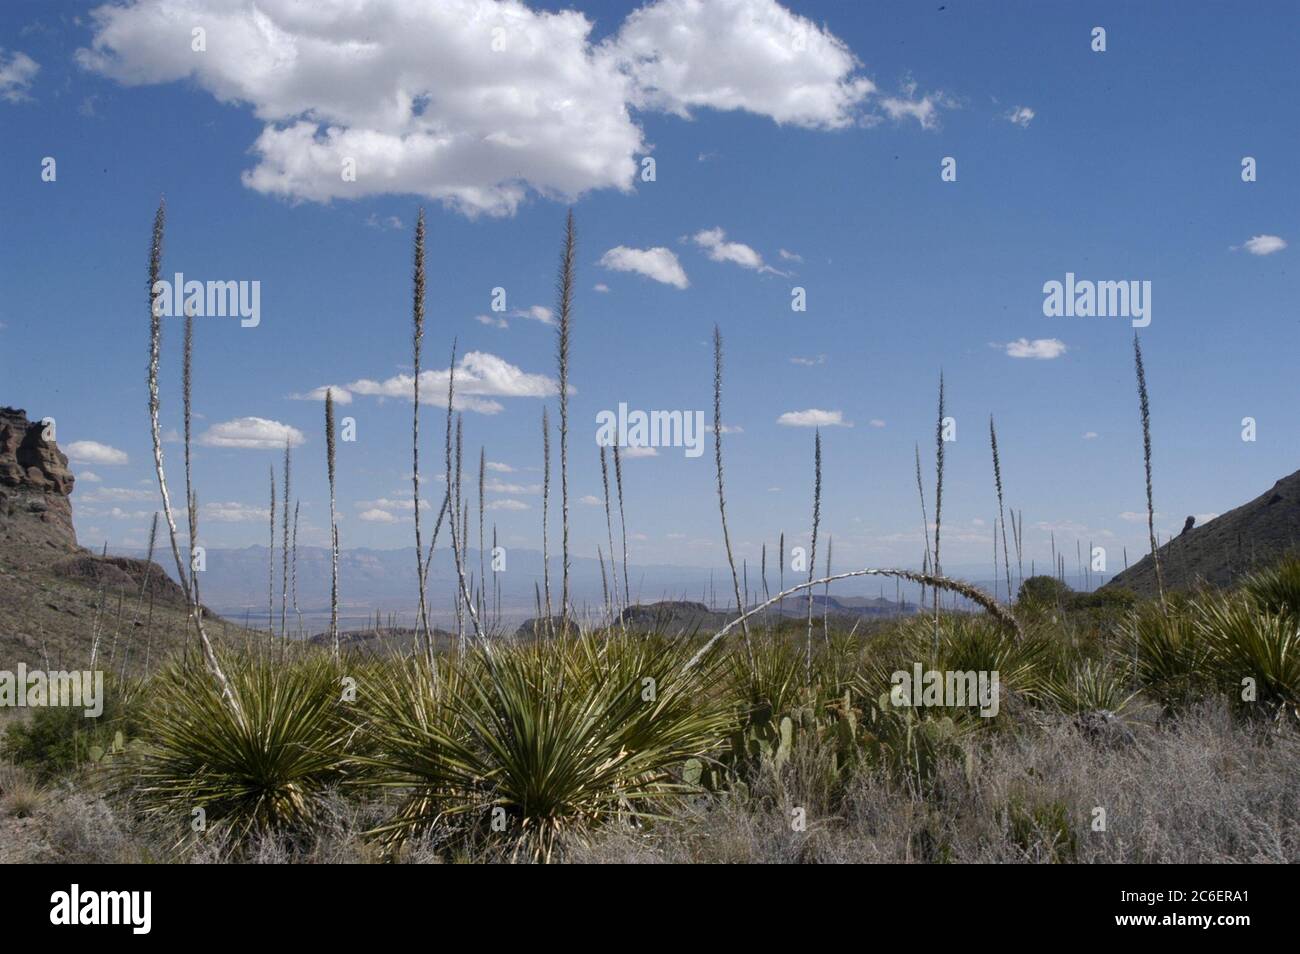 Big Bend National Park, Texas USA, March 2005: Lechuguilla plants in the Chihuahuan desert, which is the only place they are found. ©Bob Daemmrich Stock Photo